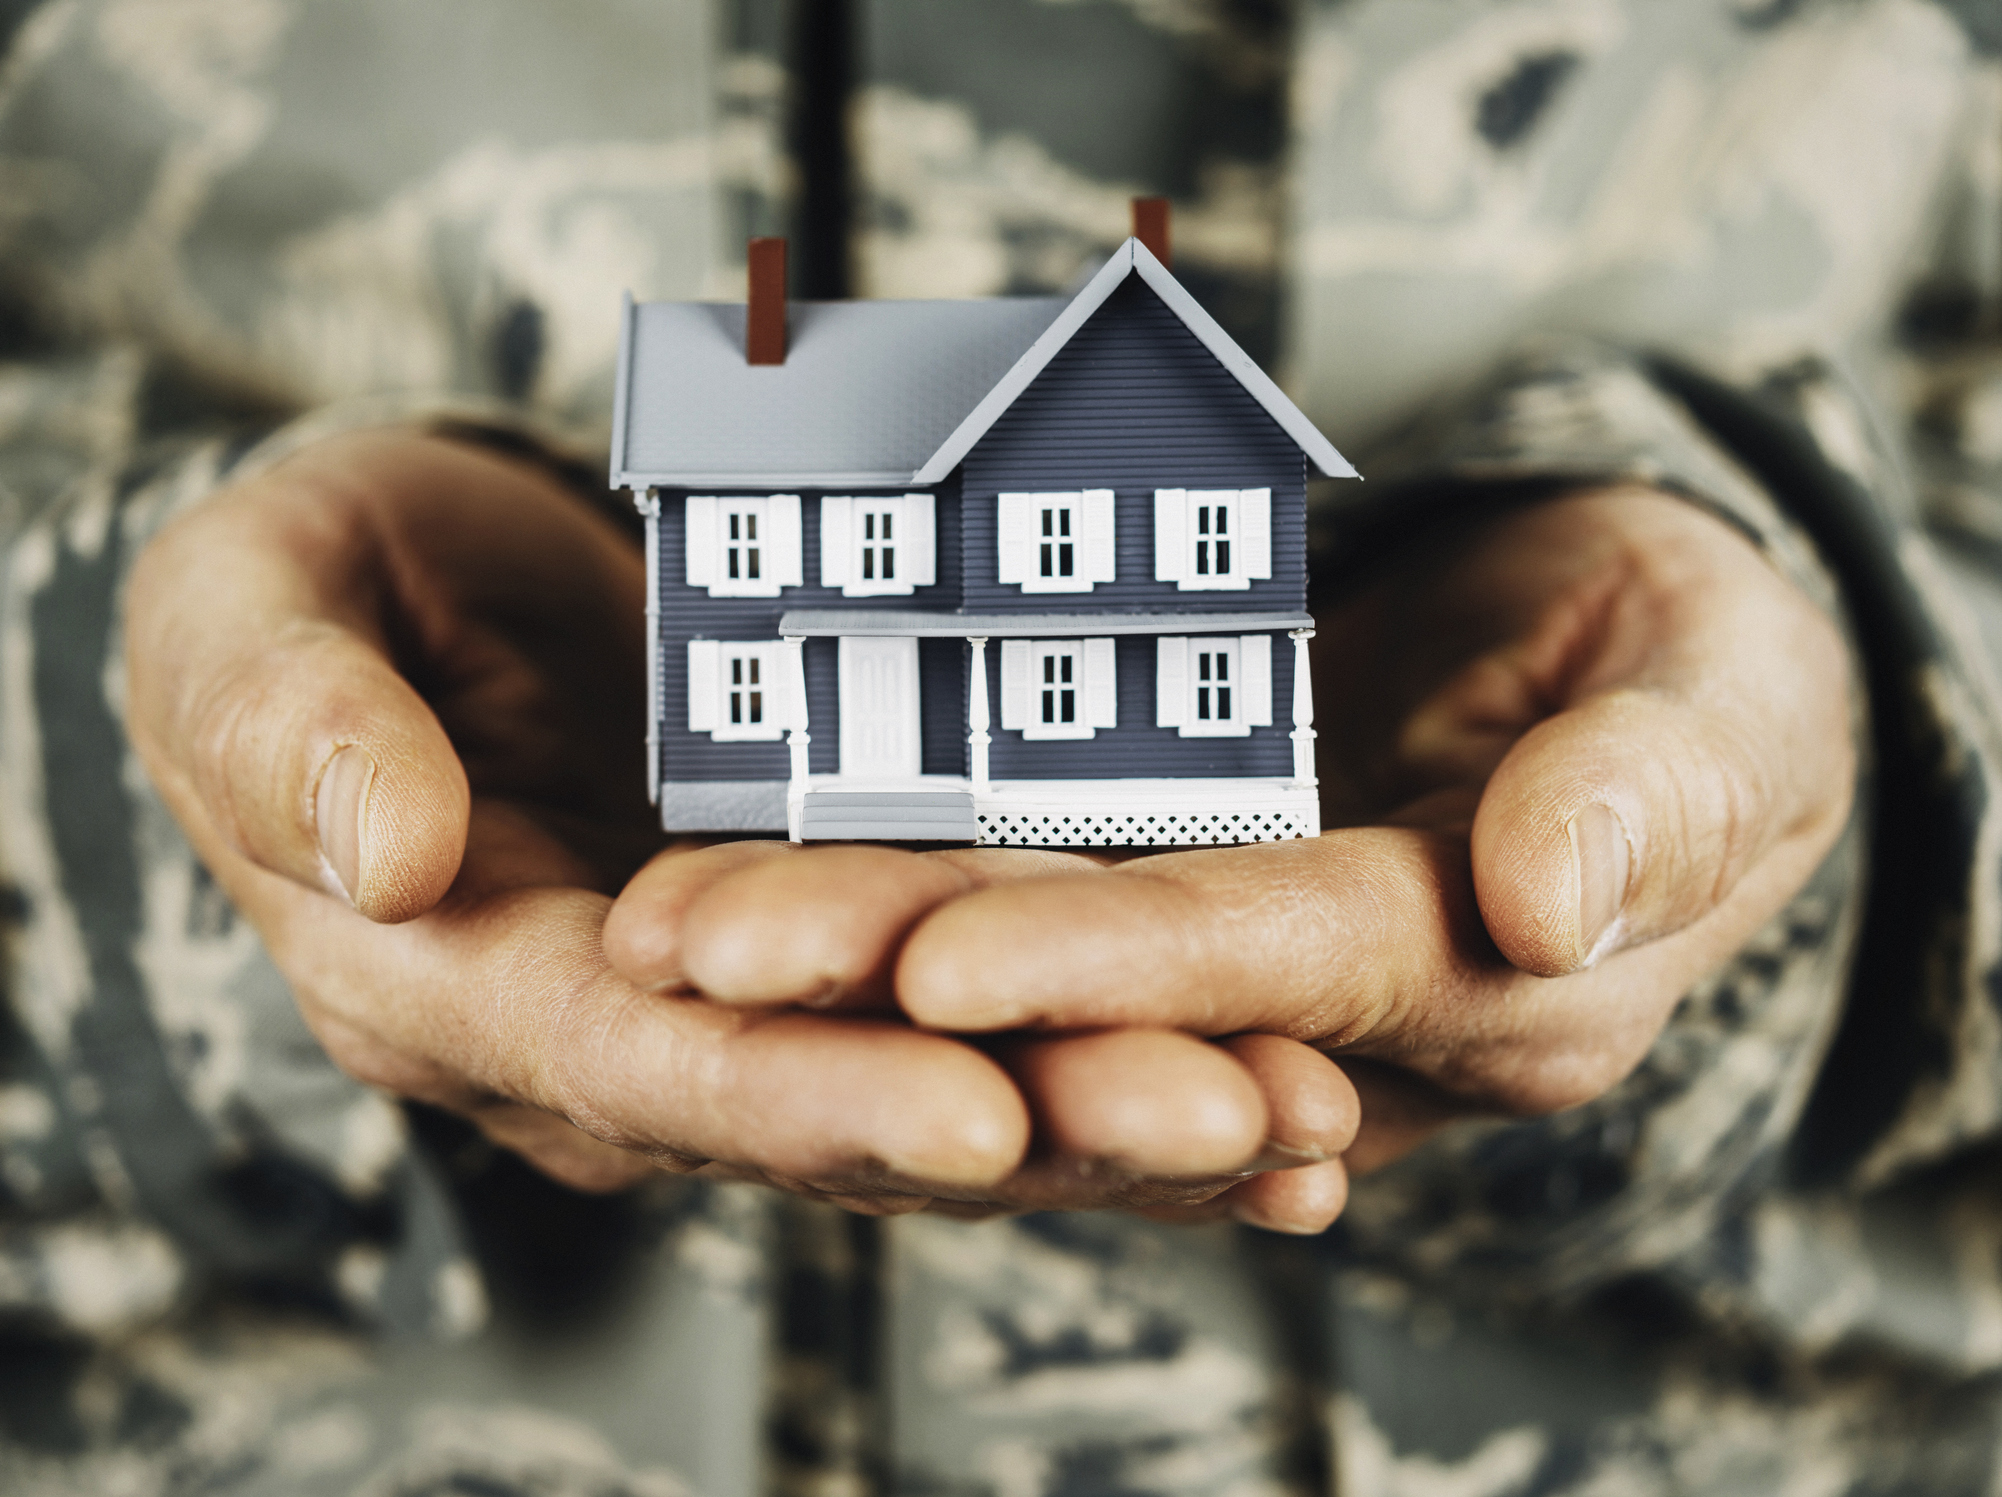 State Agency Continues Sharp Focus on Veterans, Homelessness